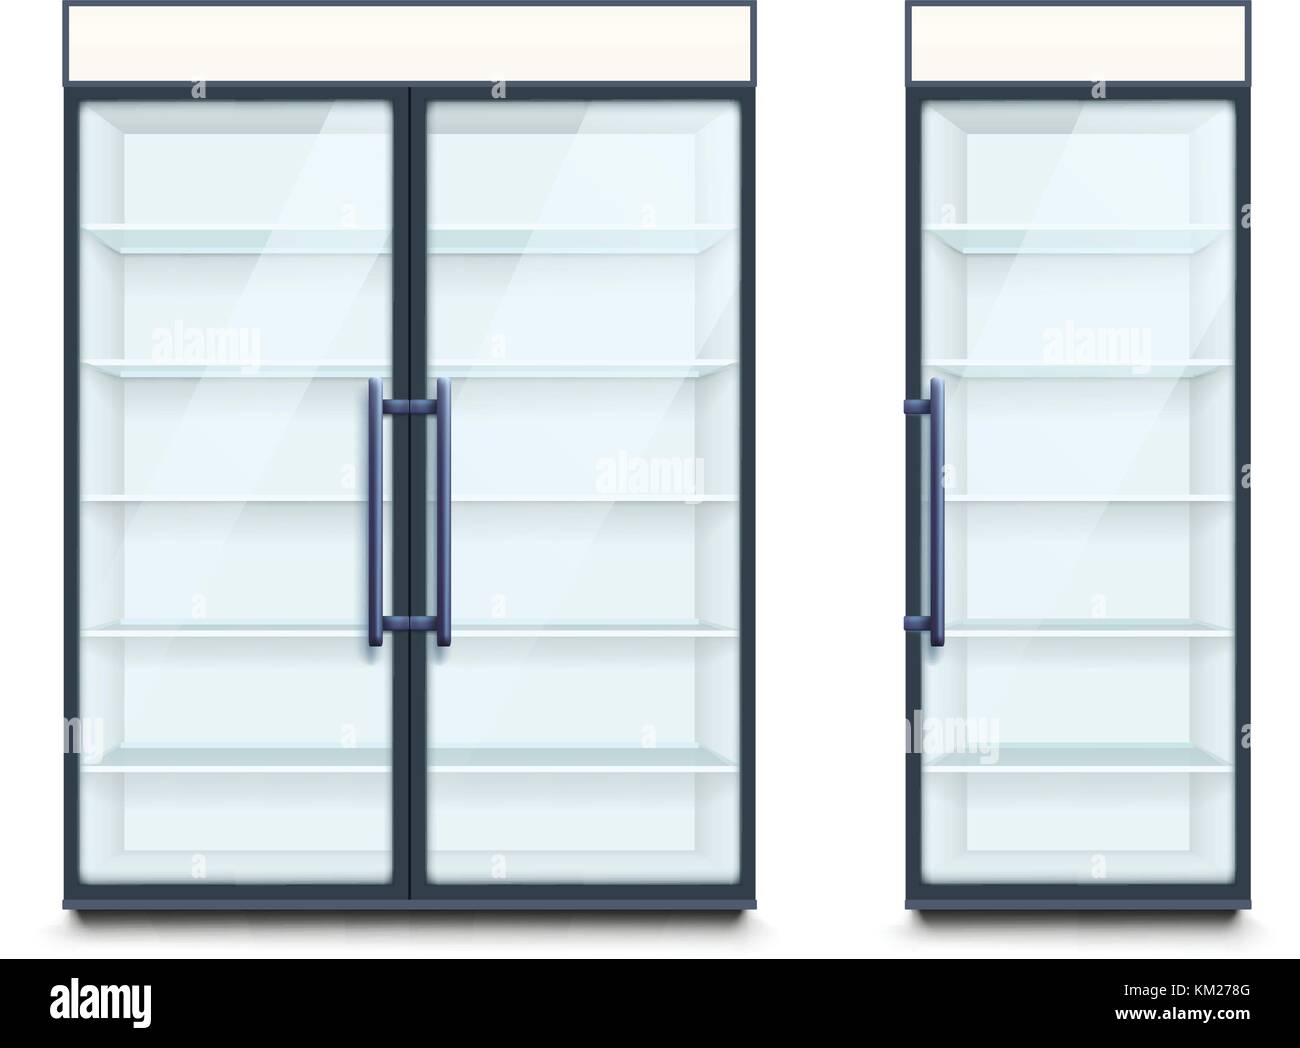 two commercial refrigerators Stock Vector